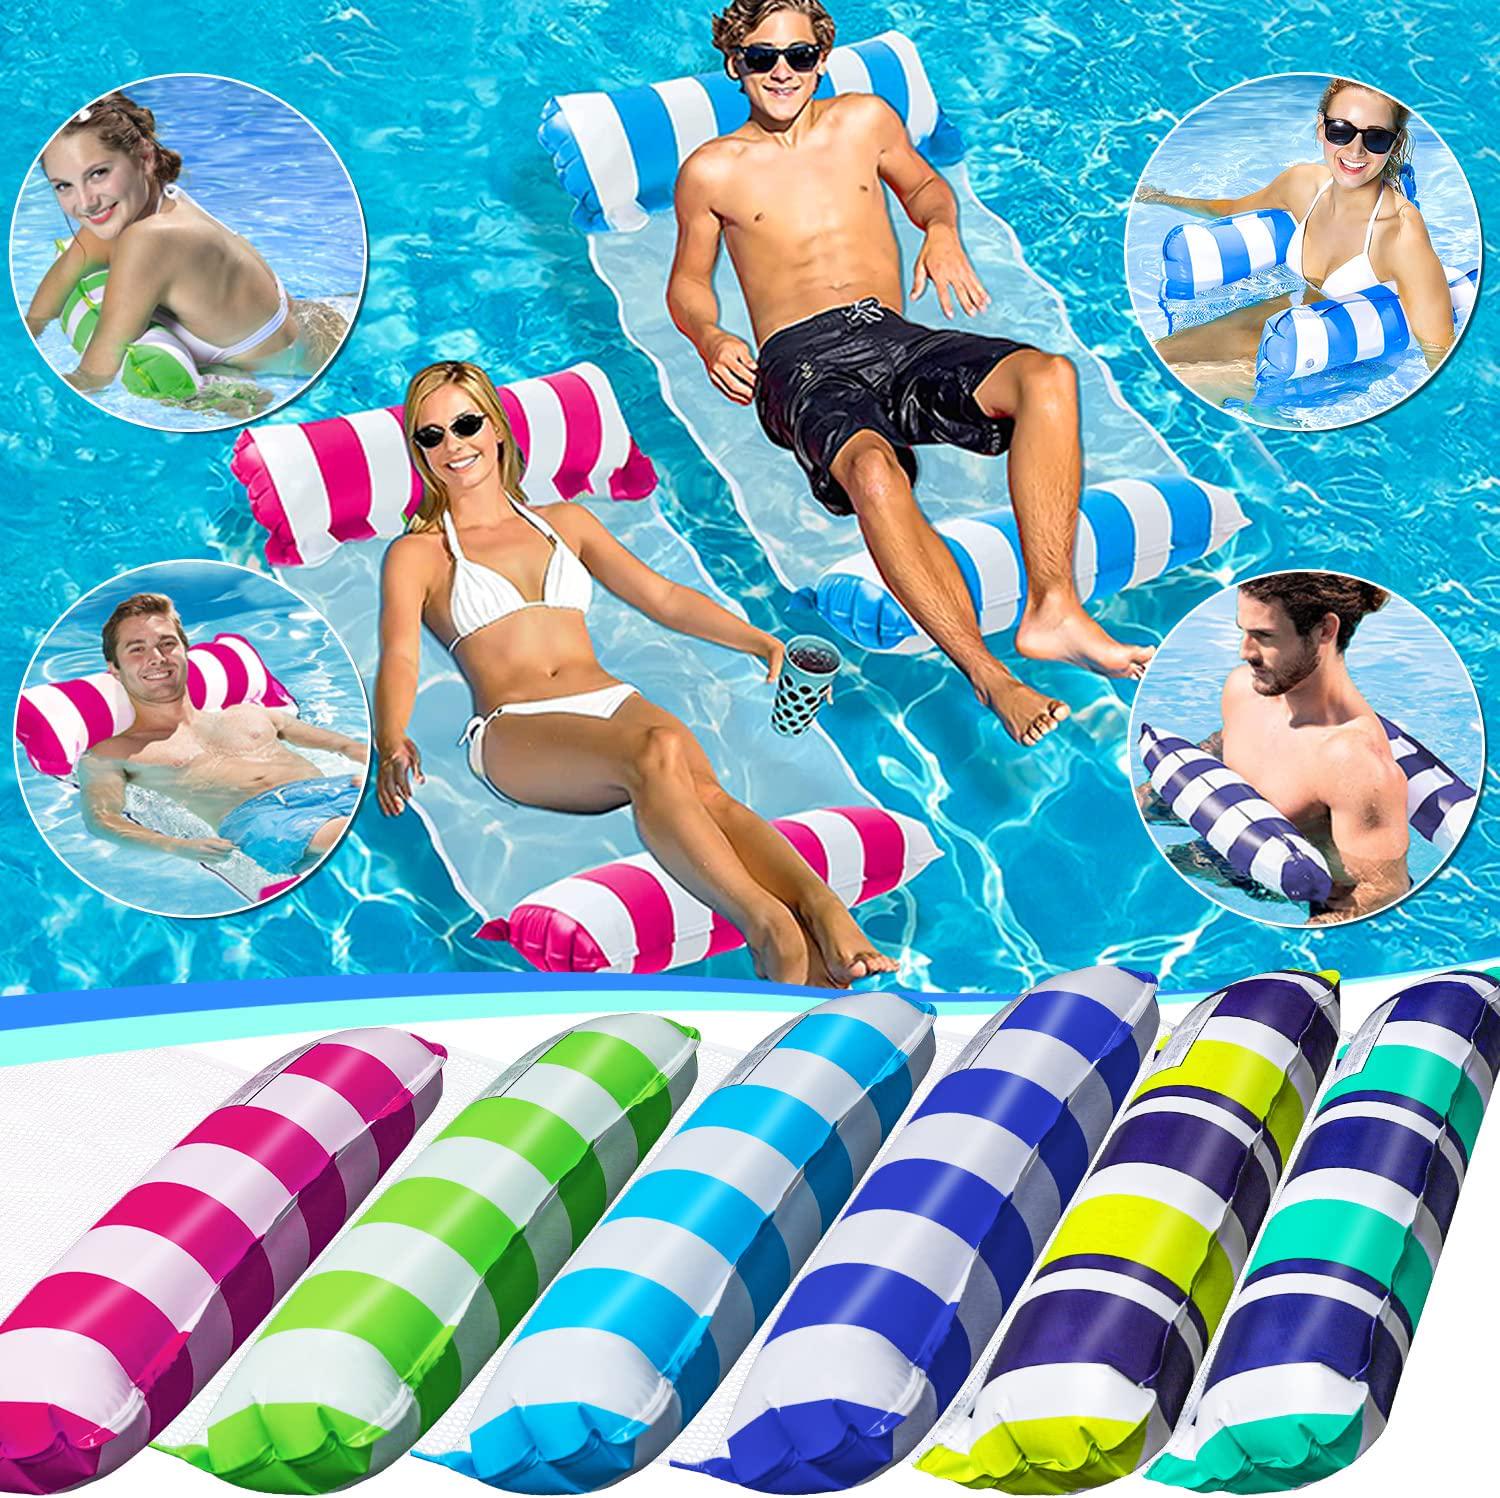 Sfee, Sfee Inflatable Pool Floats and Water Hammock,2 Pack Pool Floats Adult Size Heavy Duty Multi-Purpose Water Hammock Float, Non-Stick PVC Materia Pool Float for Swimming Pool, Beach, Lake